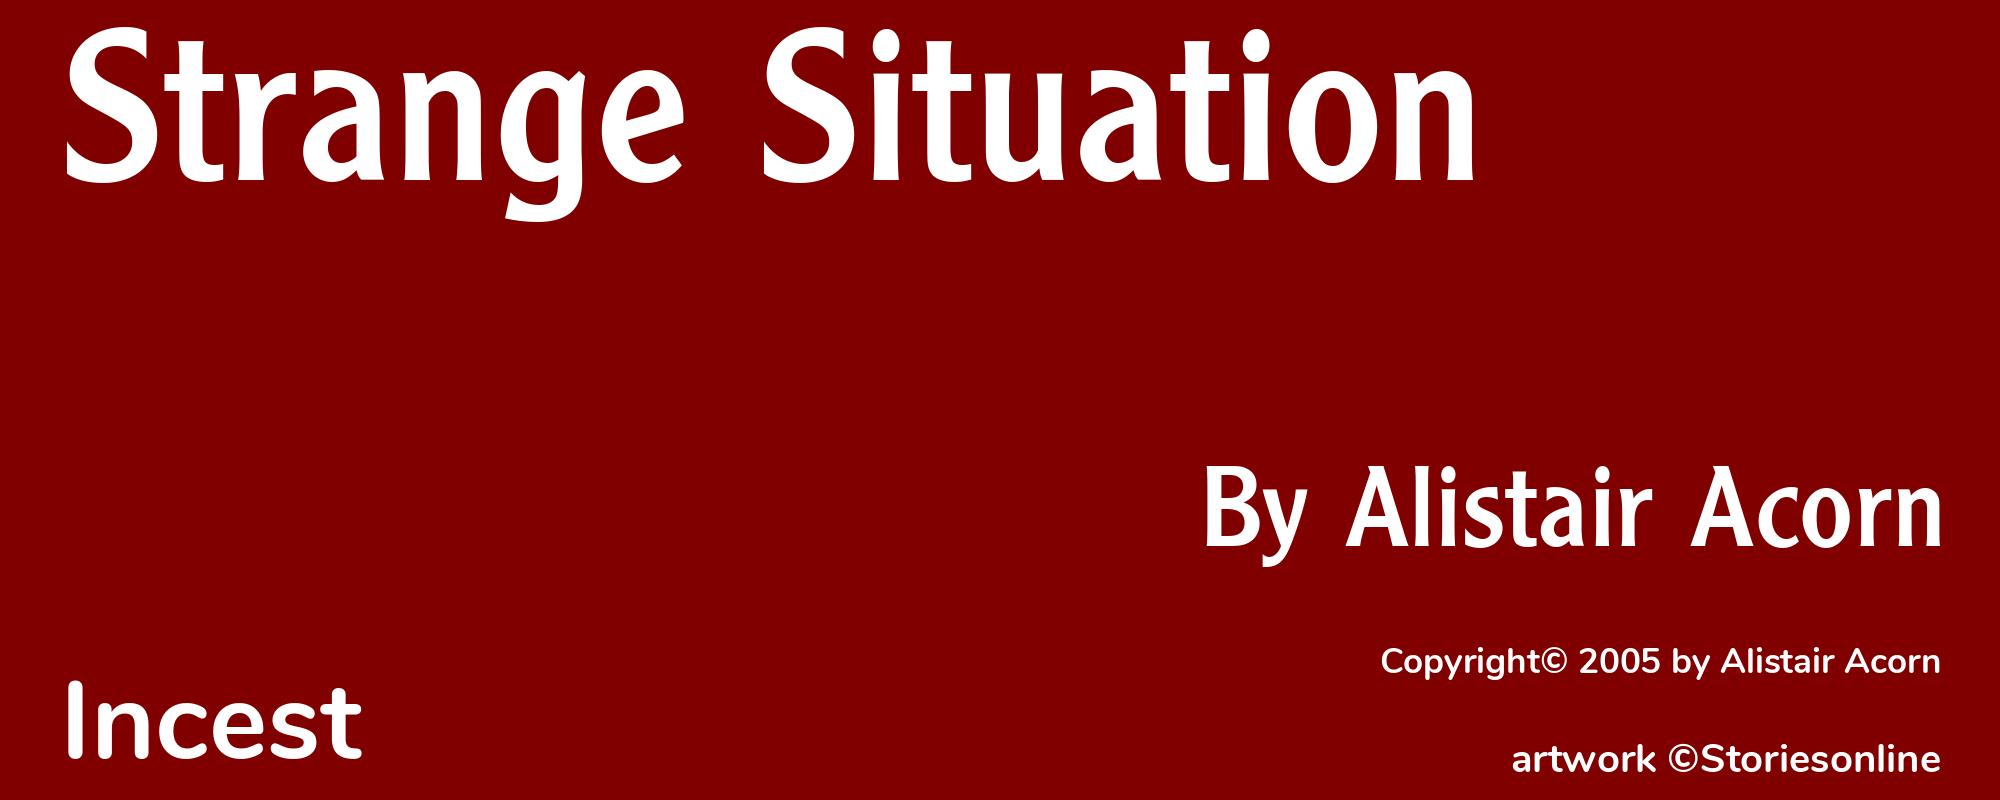 Strange Situation - Cover